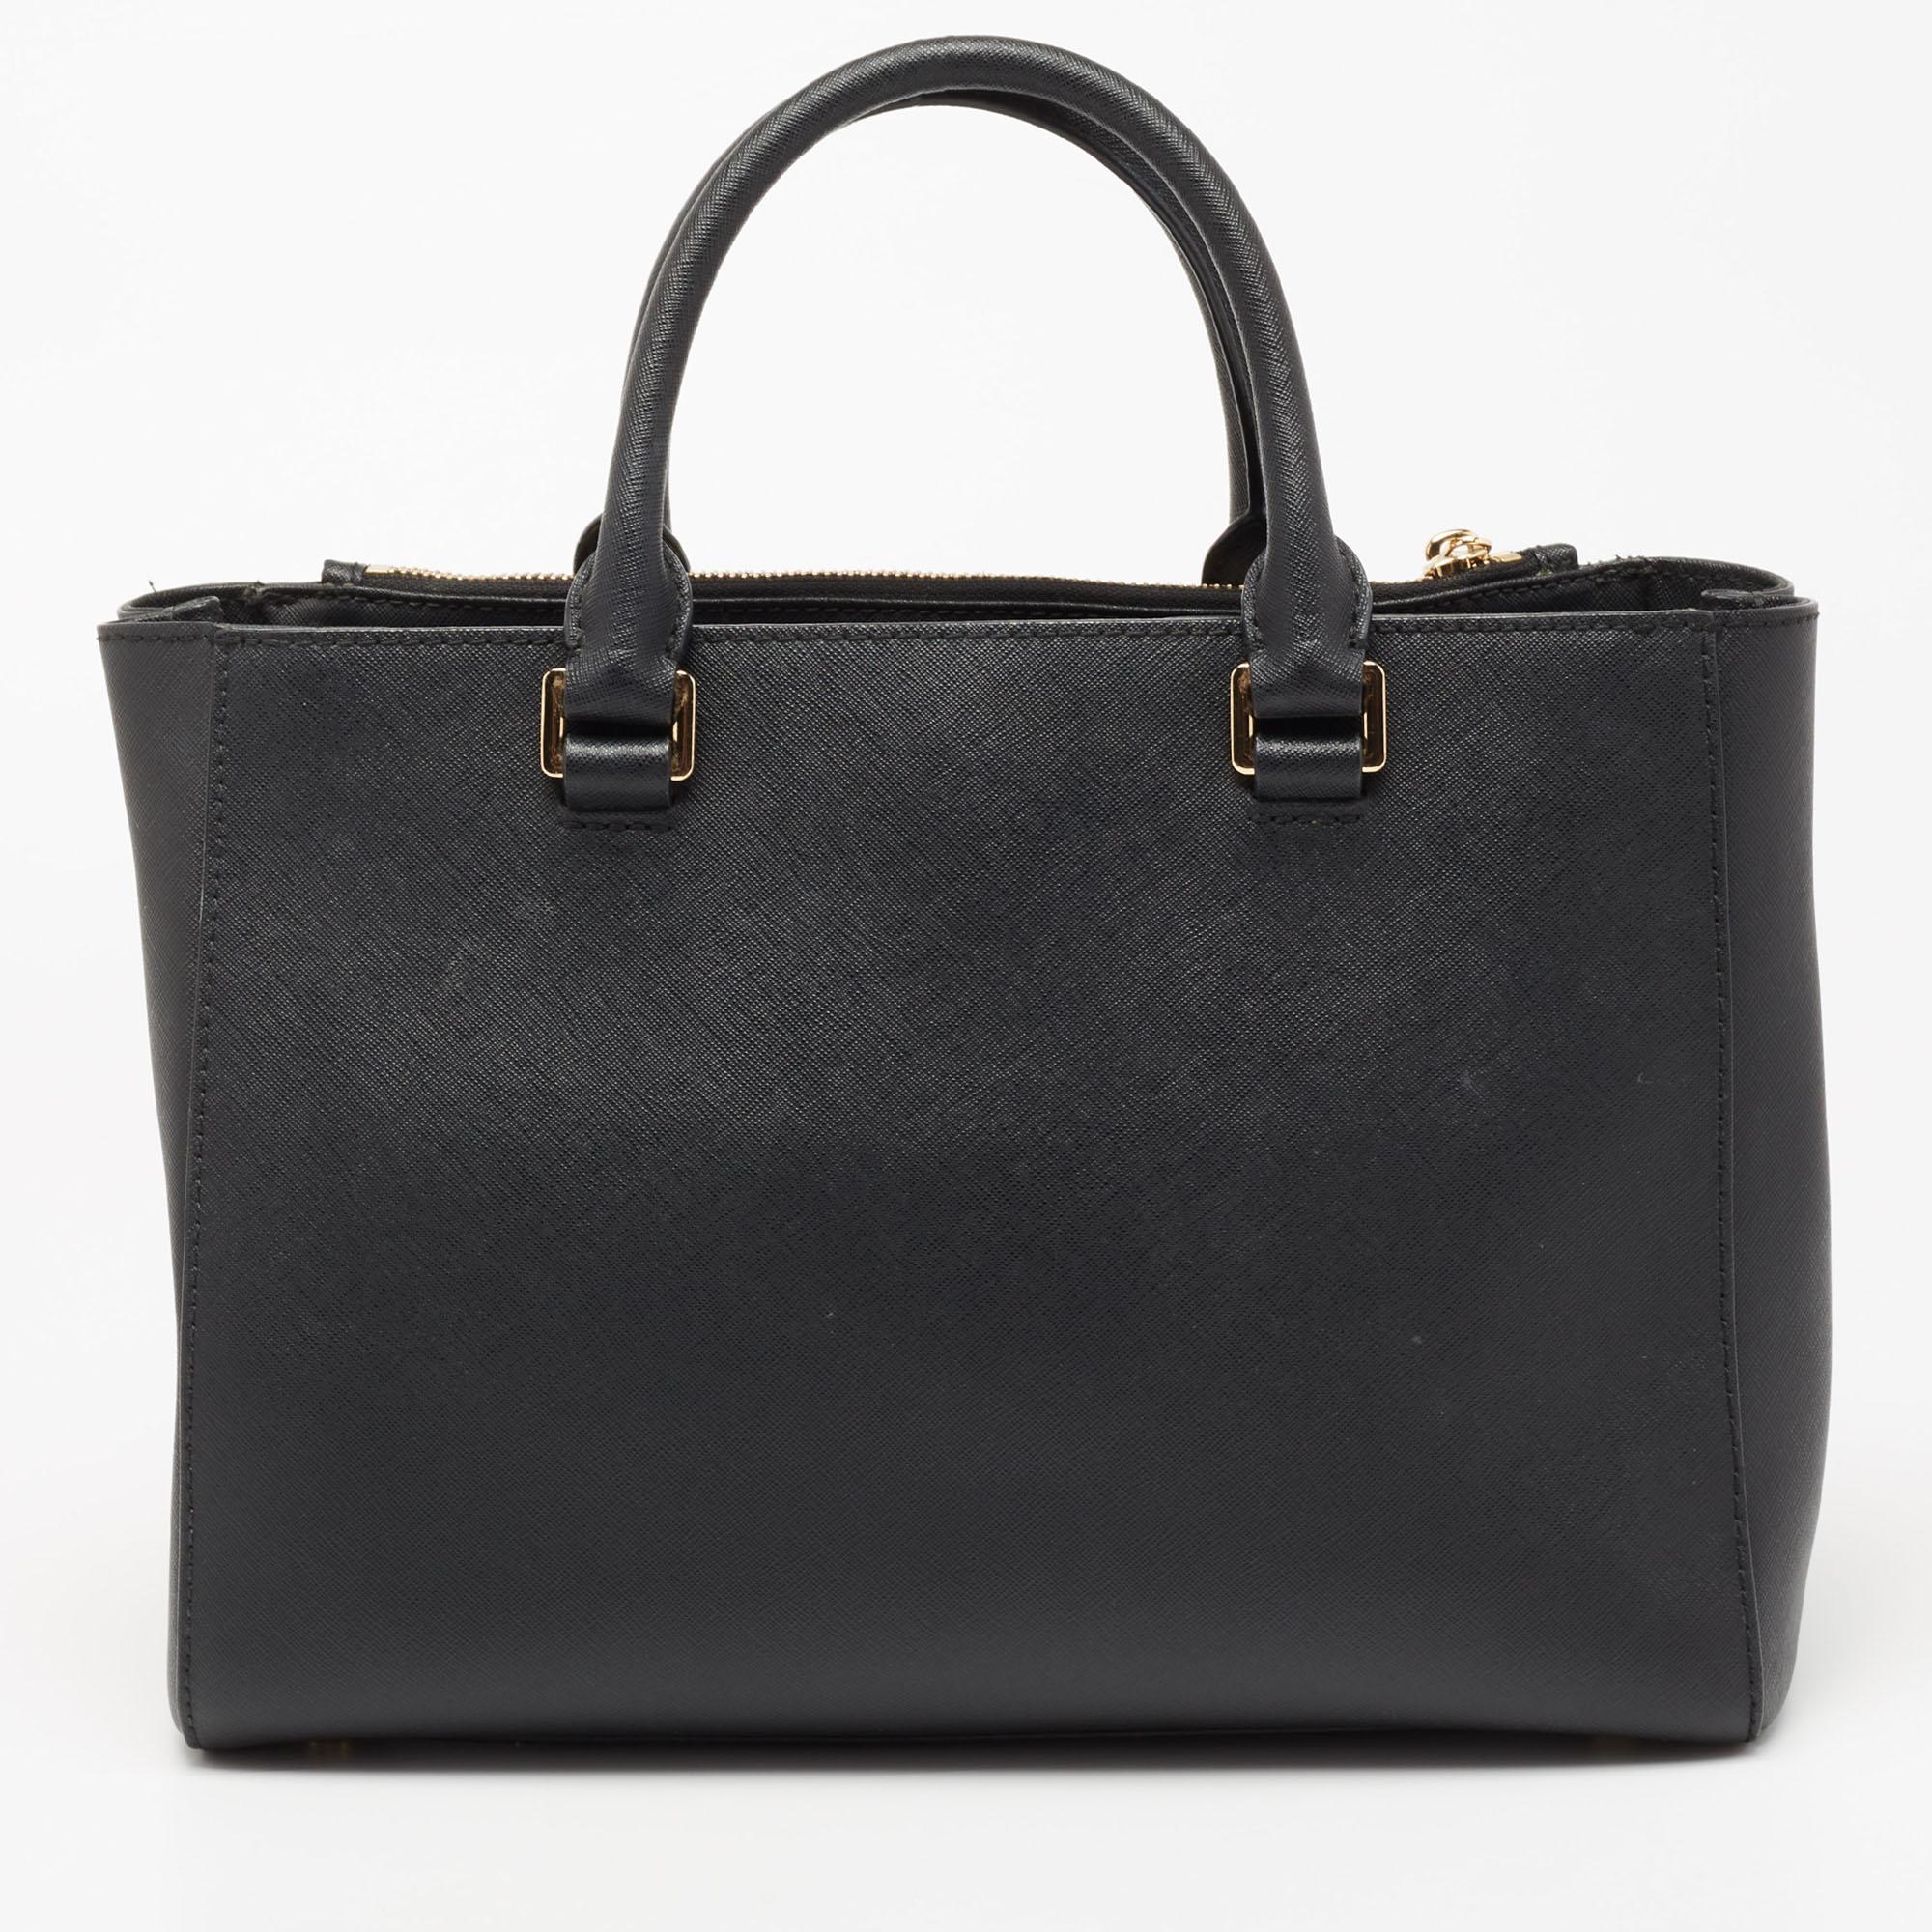 This admirable tote from MICHAEL Michael Kors is a true beauty. Crafted from black Saffiano leather, it is designed to complement your sophisticated personality. The interior of this bag is enduring and capacious. The tote comes with dual handles,